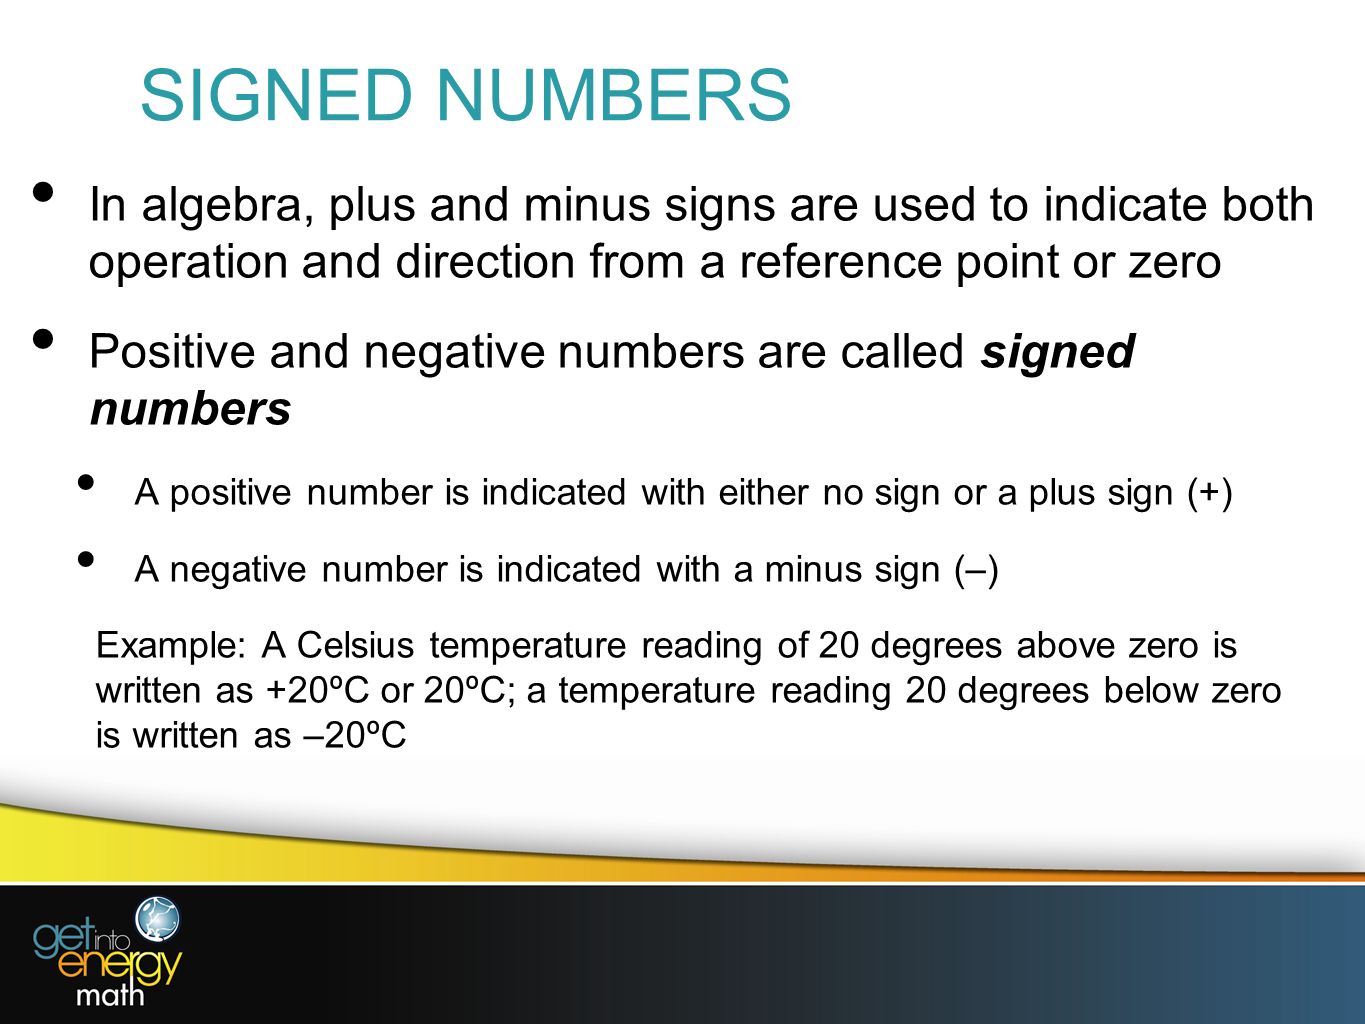 SIGNED NUMBERS In algebra, plus and minus signs are used to indicate both operation and direction from a reference point or zero.